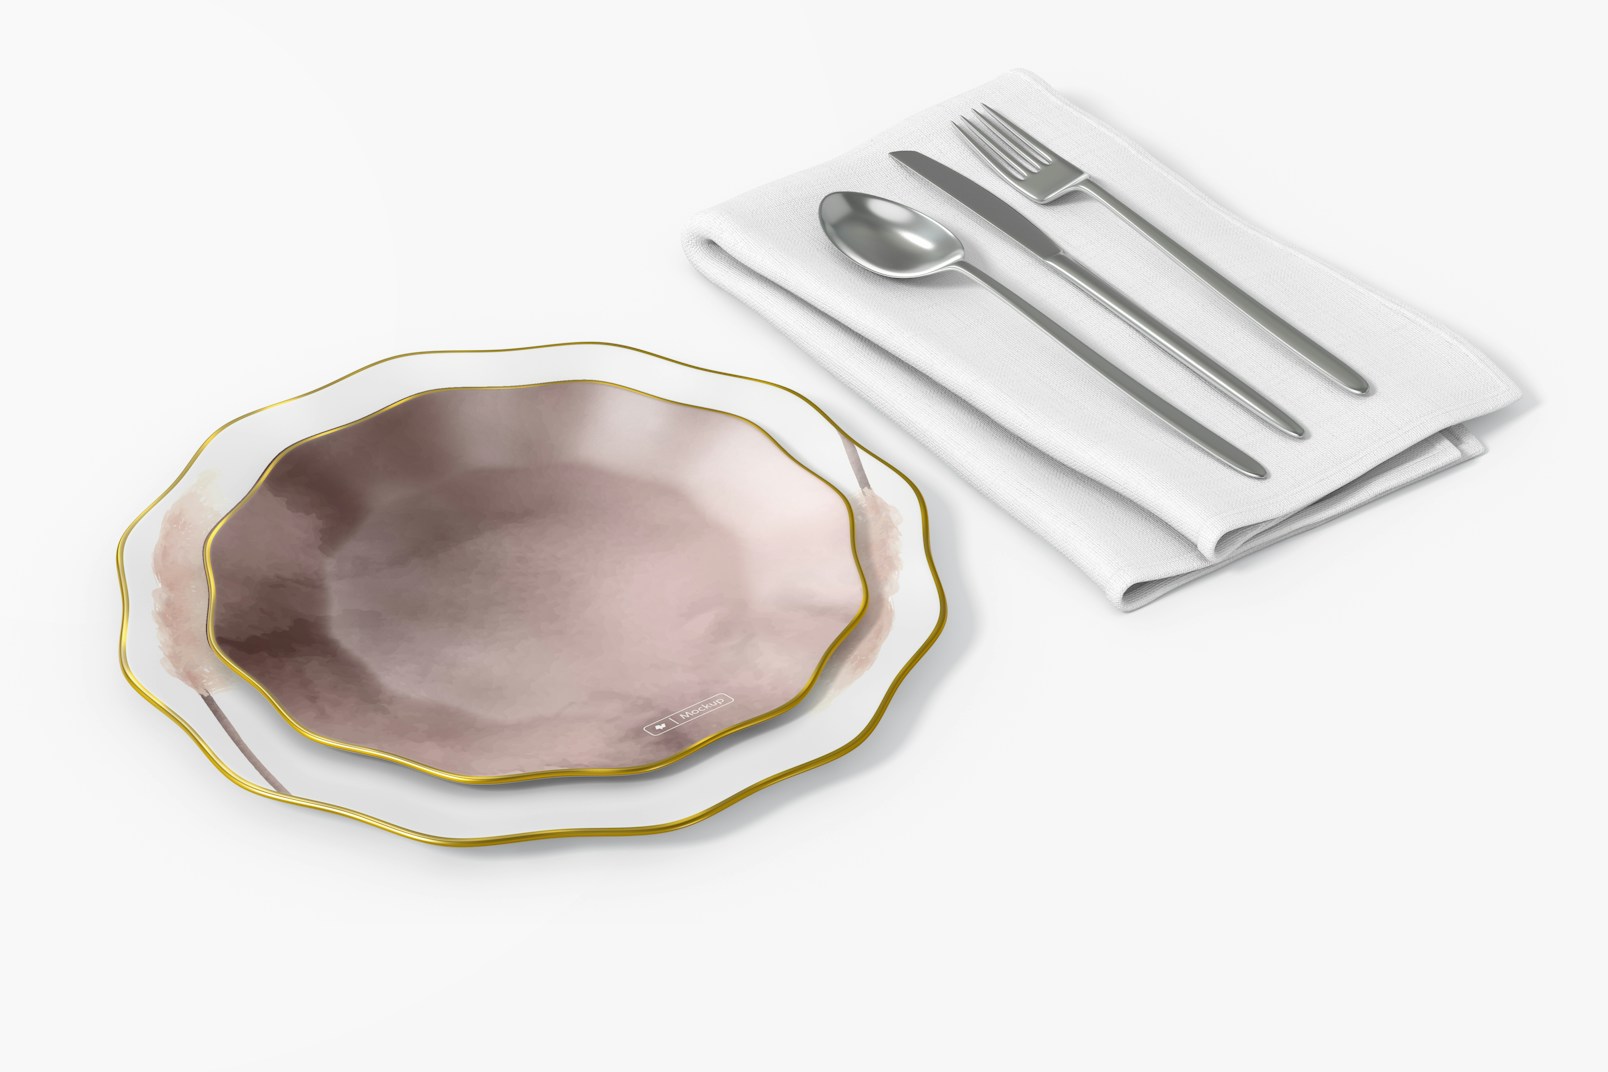 Flower Shaped Plate Mockup, Perspective View